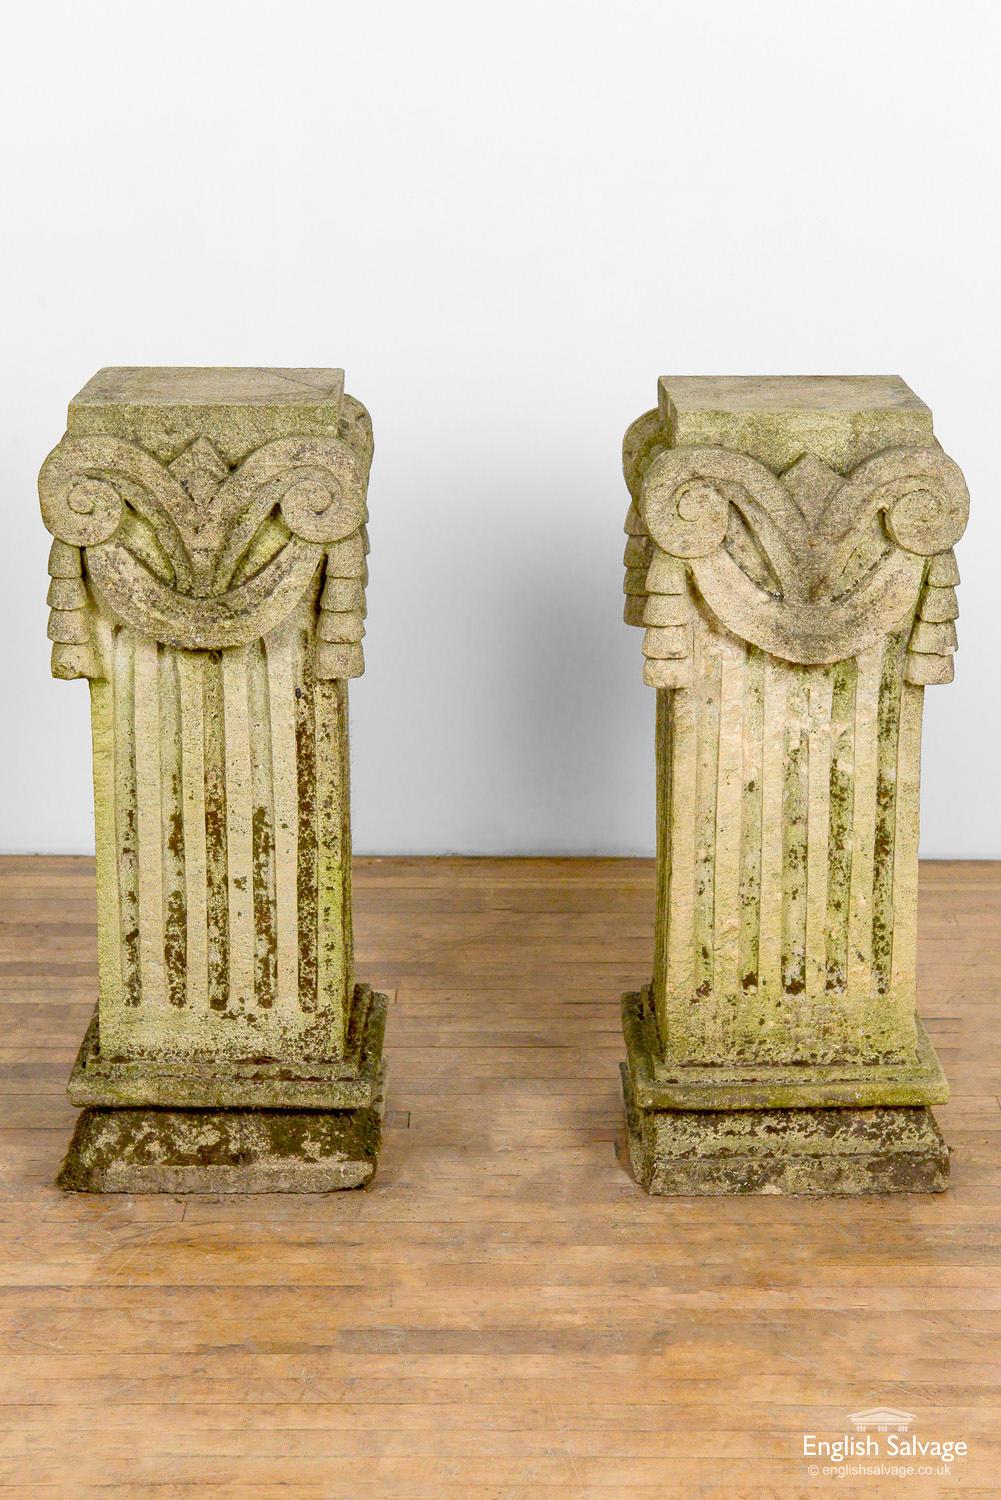 Reclaimed pair of classical style plinths / pedestals / stands with swag detail to the tops and fluting to the columns. Nicely weathered with moss and lichen patina.